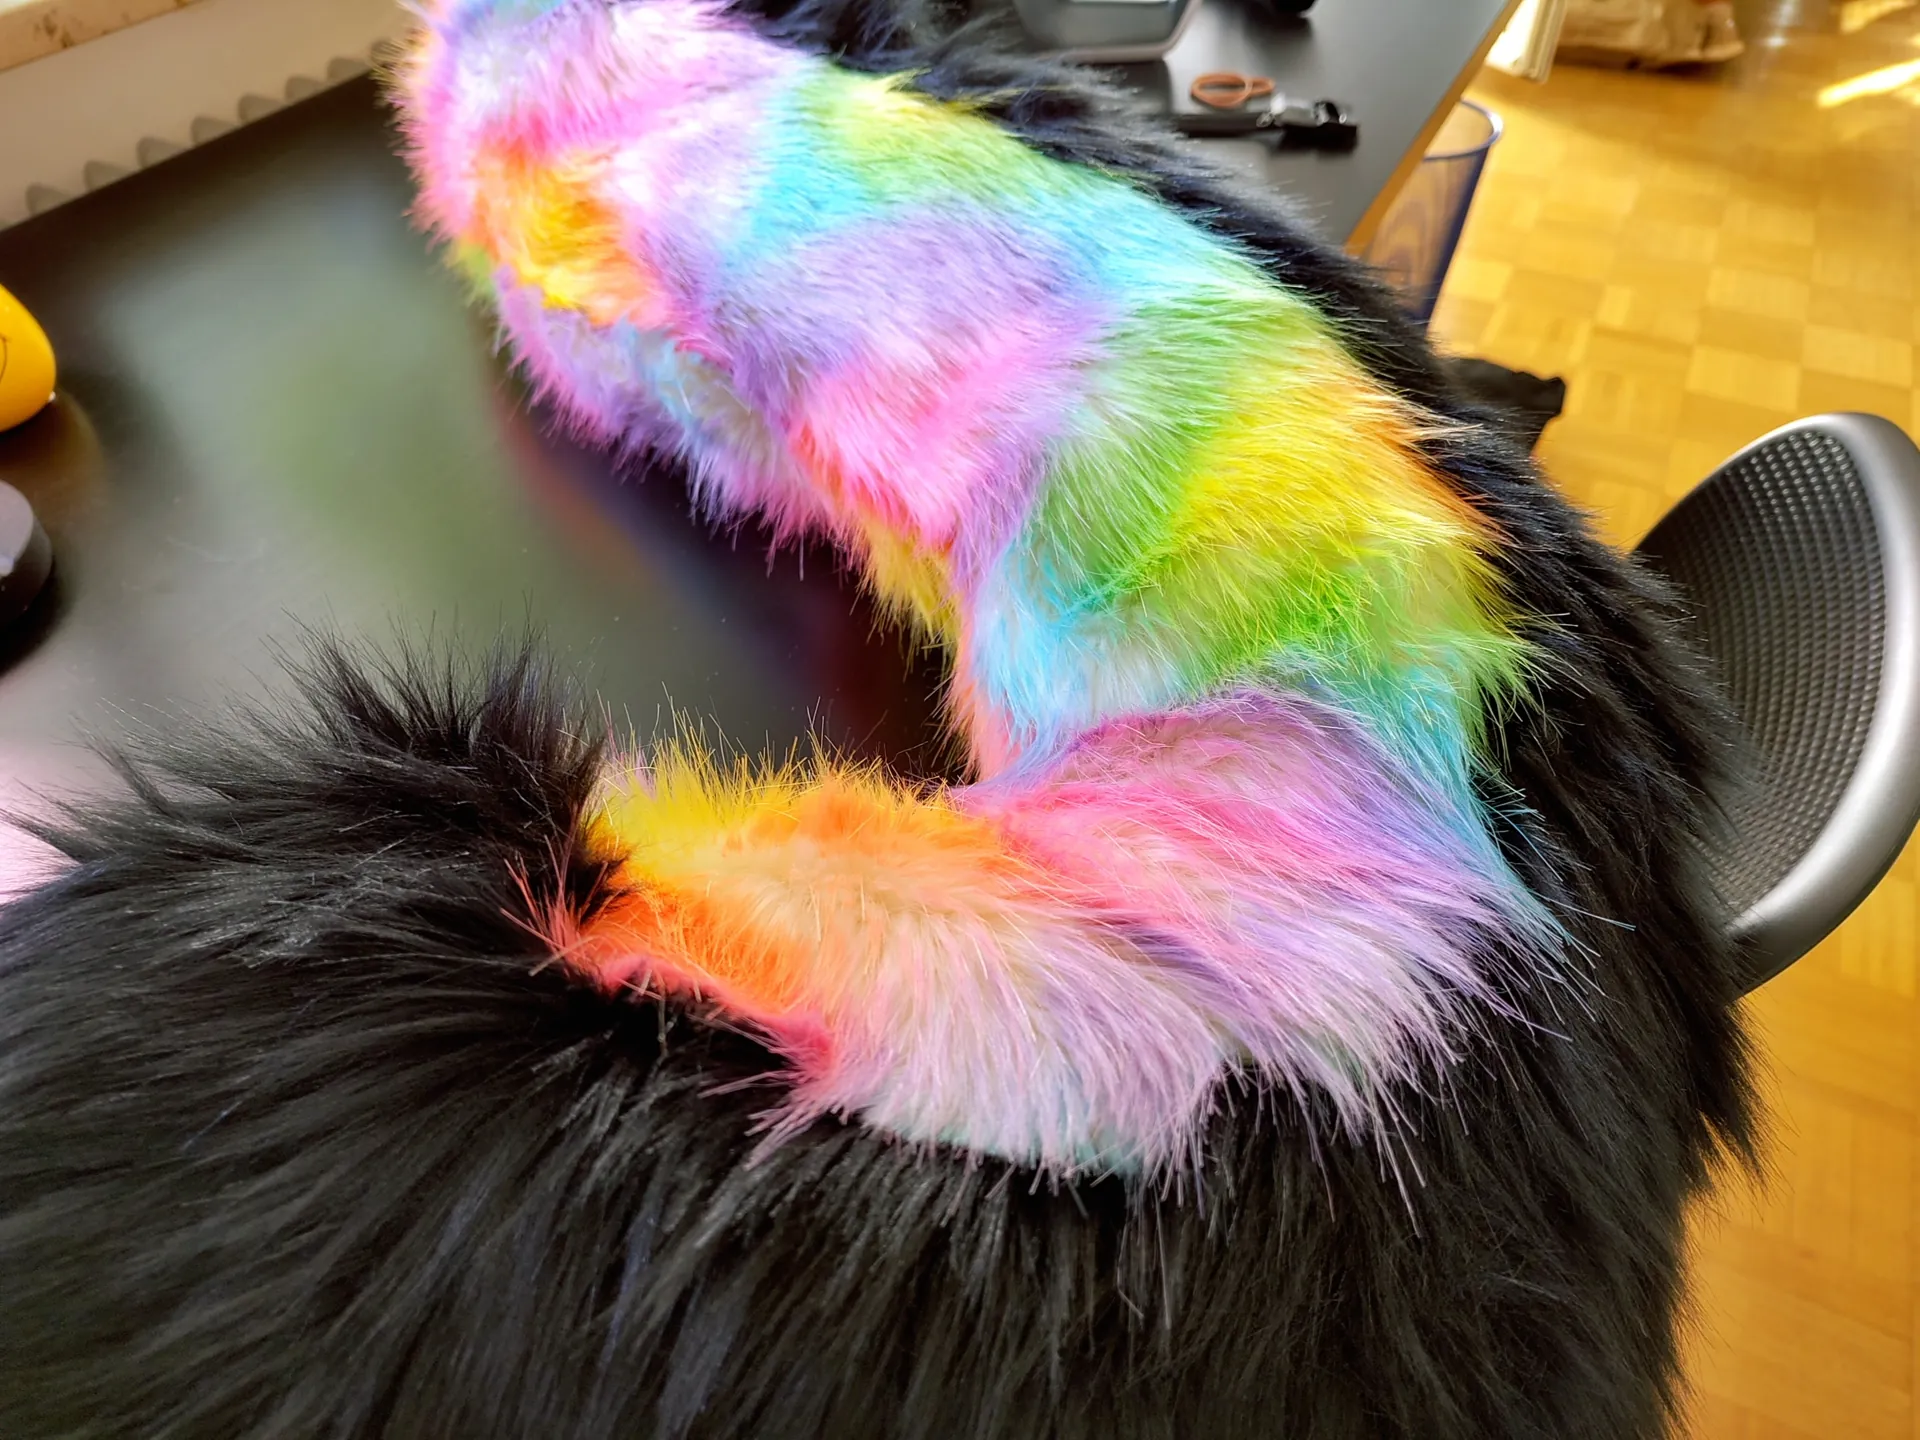 Close up of a fursuit tail, the bottom is black while the top is rainbow colored. It's lying on my way too clean desk.